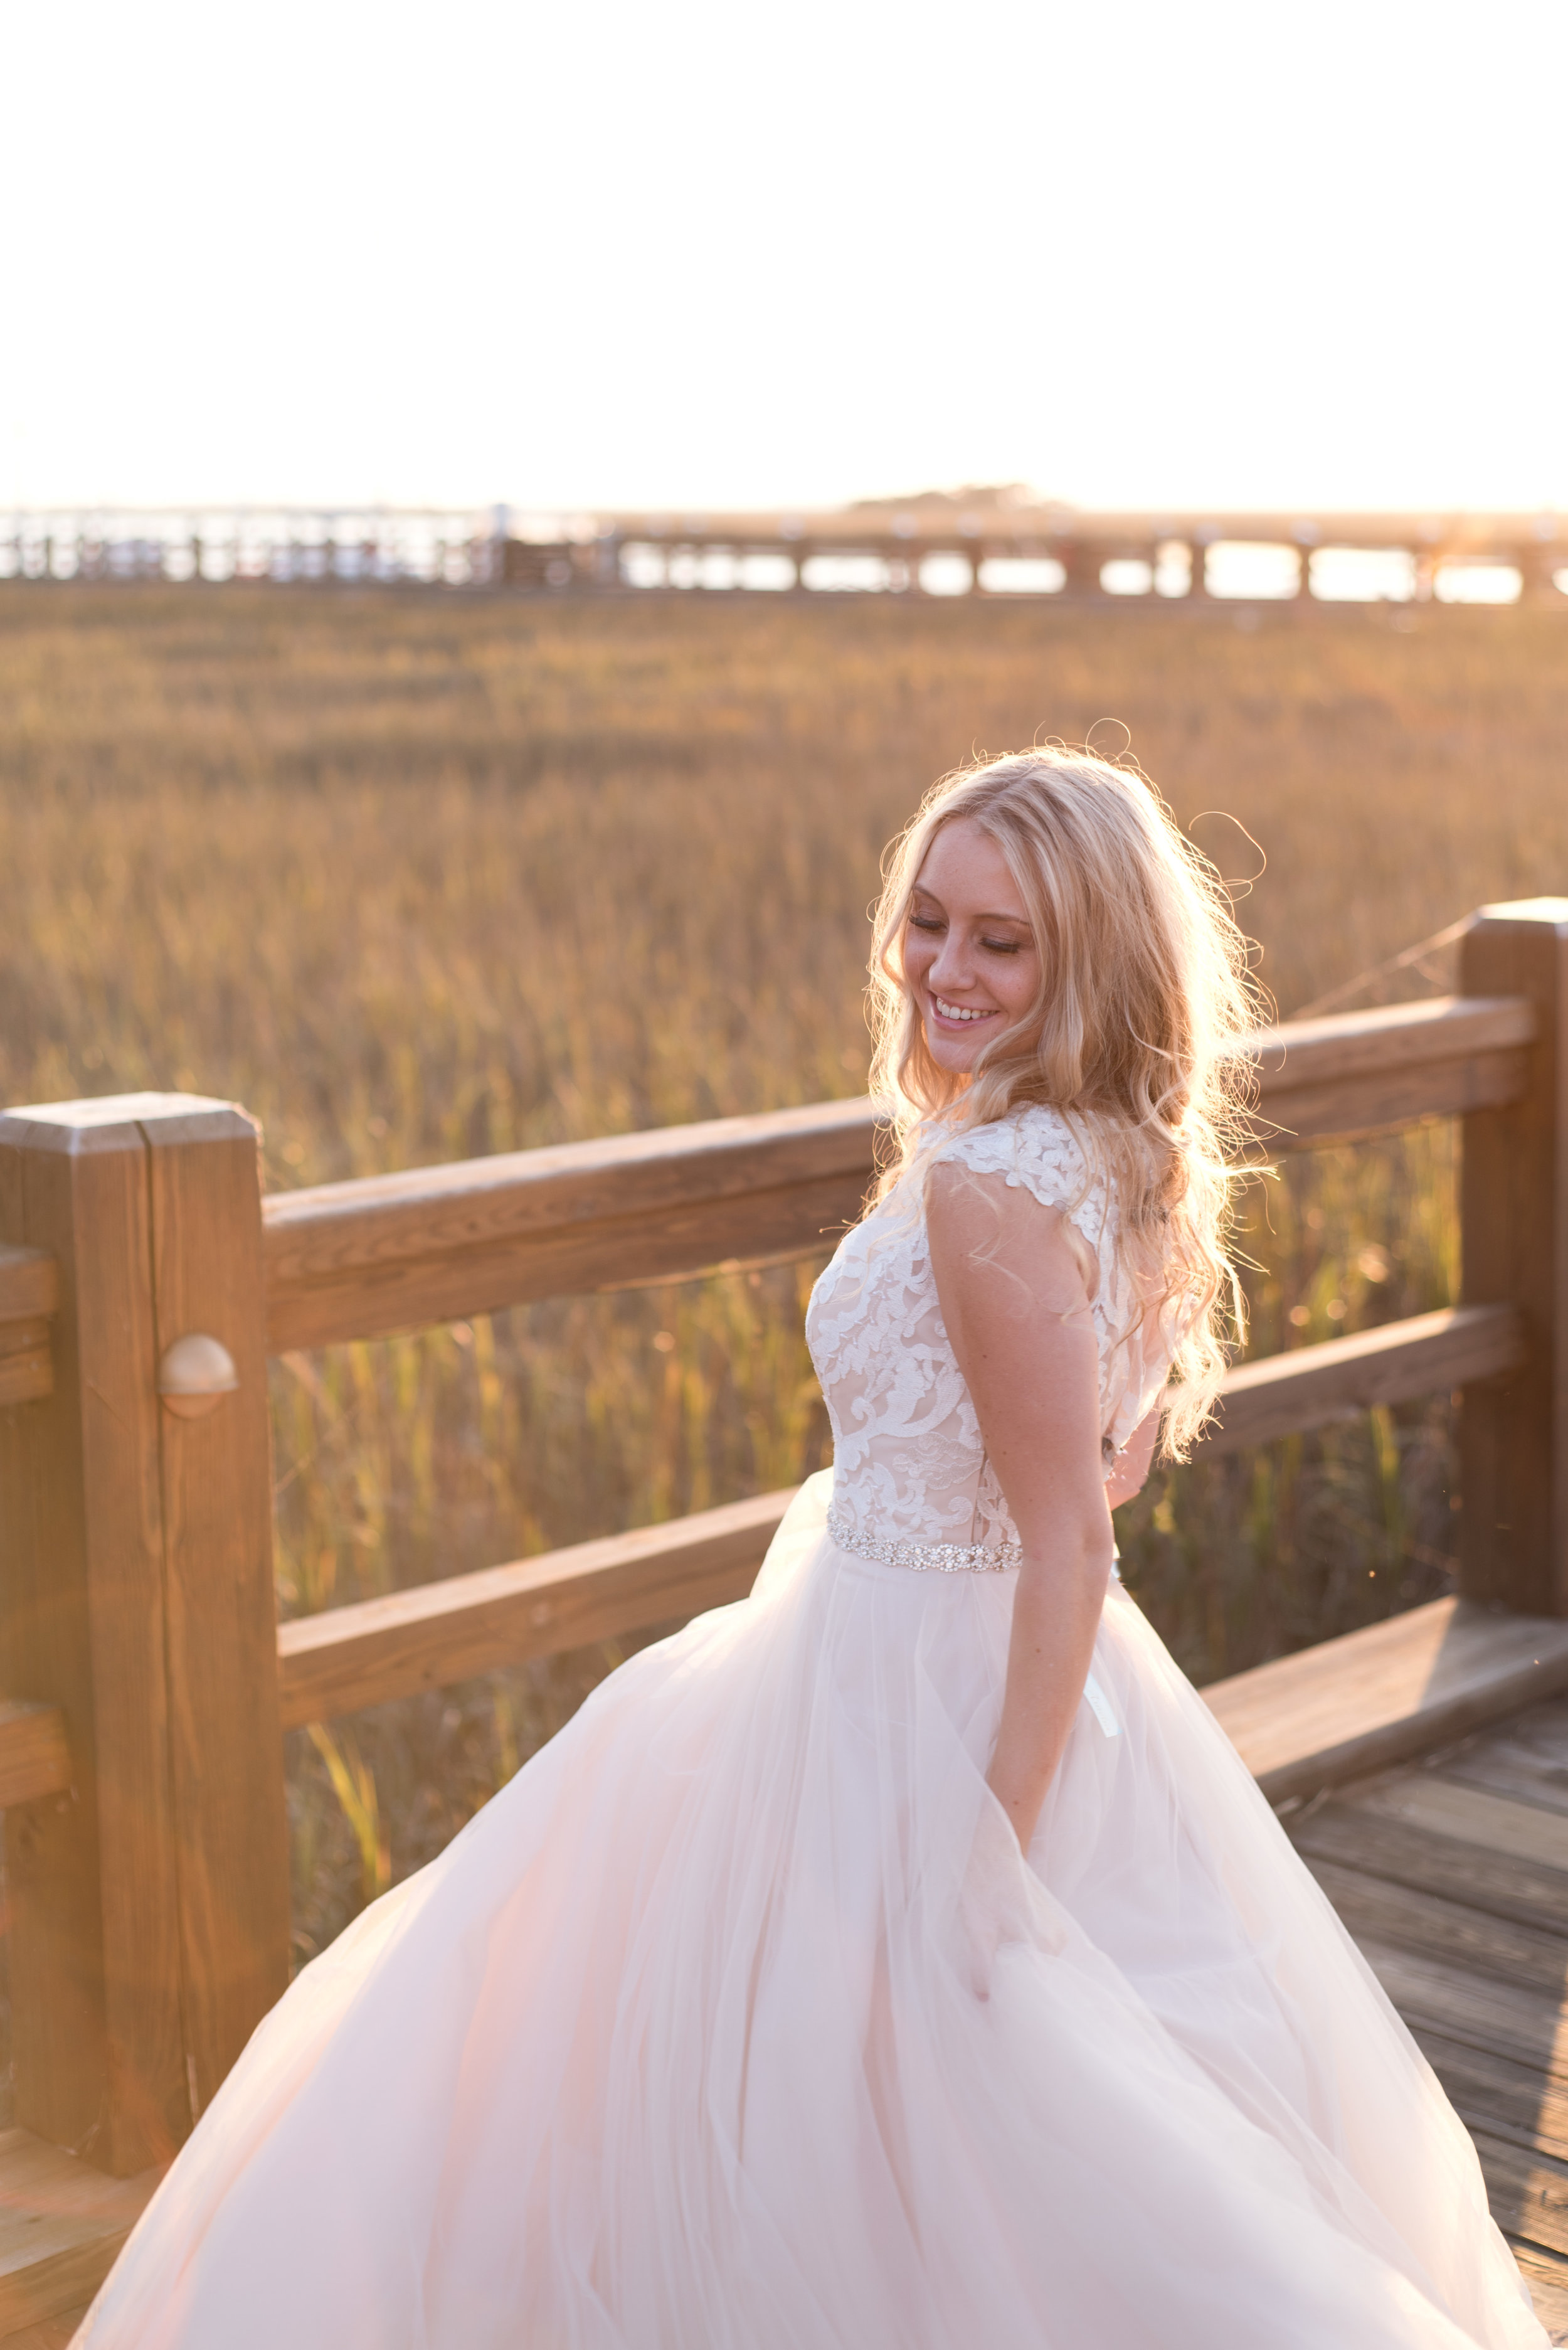 Ivory-and-Beau-bridal-boutique-Delegal-Marina-Samba-to-the-Sea-Photography-carrie-maggie-sottero-rebecca-ingram-bridal-savannah-bridal-boutique-savannah-weddings-marsh-wedding-georgia-wedding-savannah-wedding-sunset-wedding-savannah-wedding-gowns-3.jpg